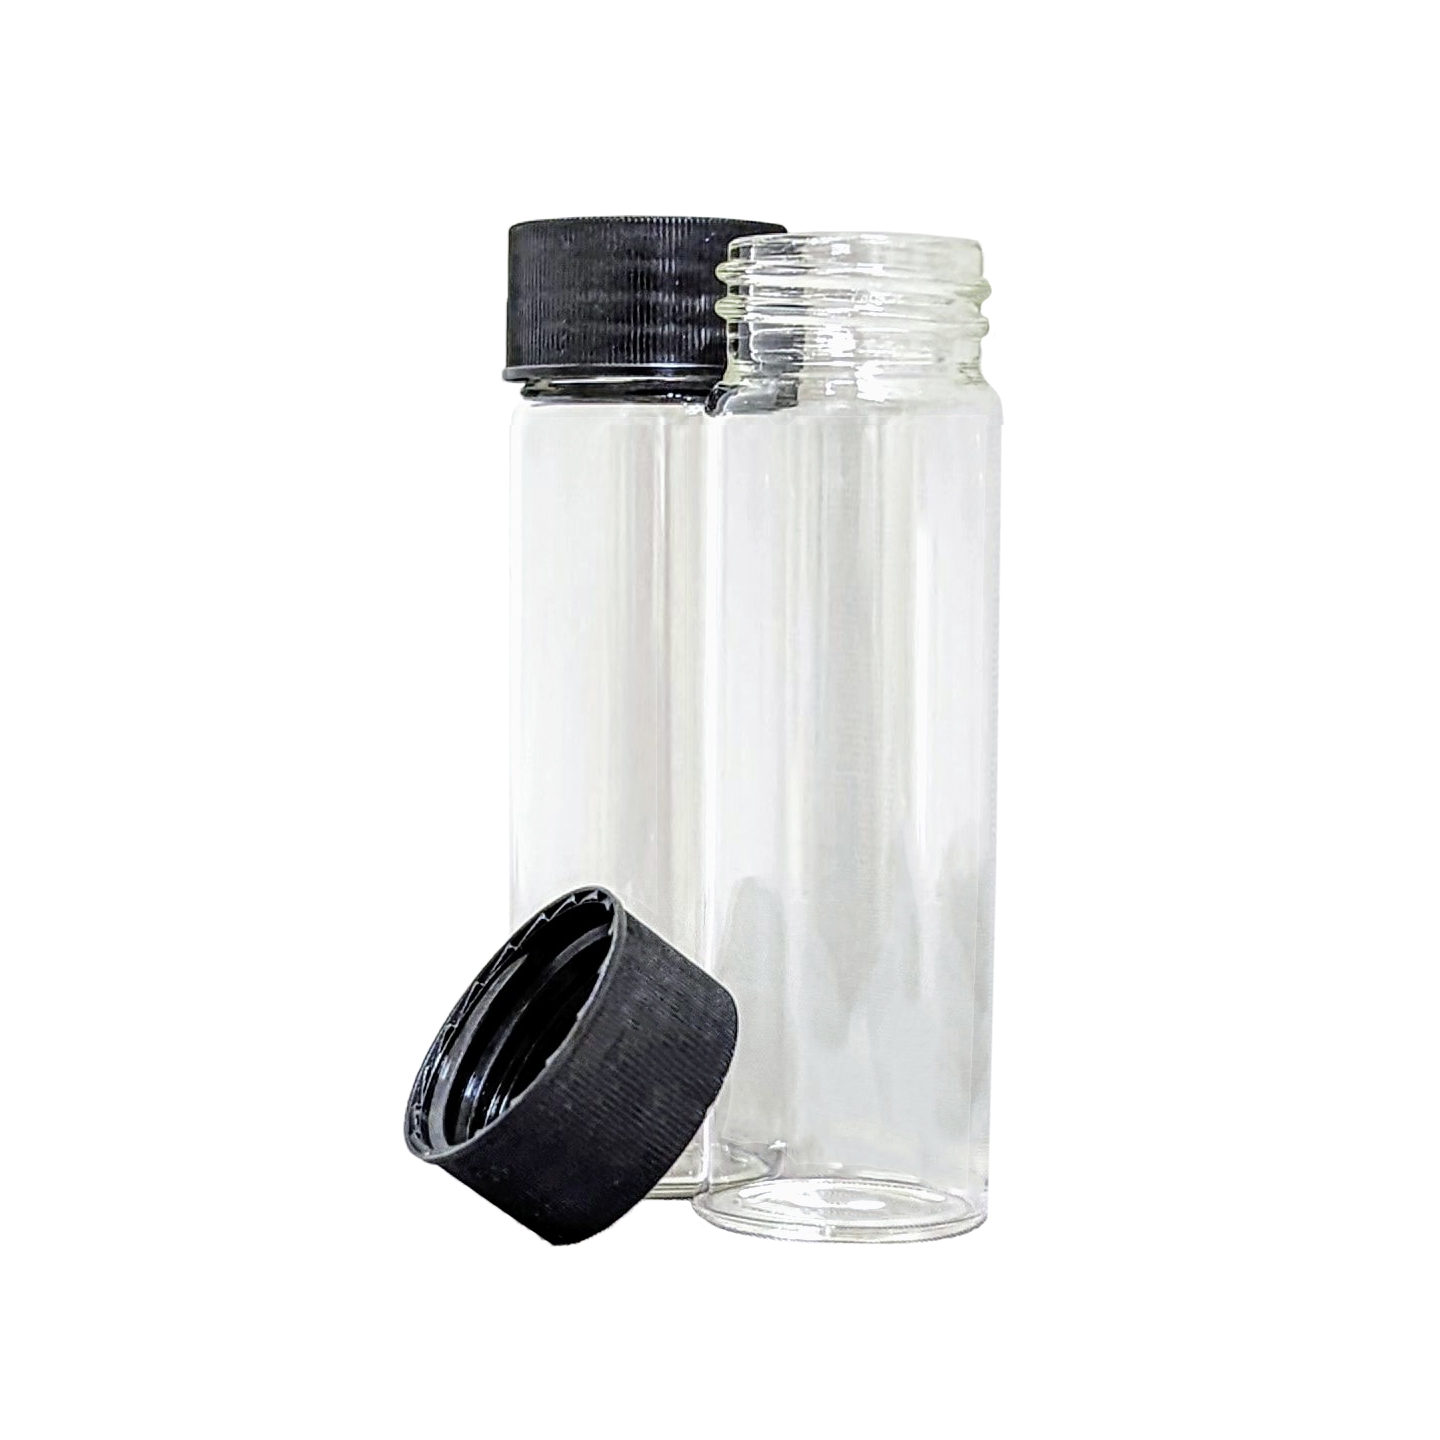 Vial, Screw Neck Vials, Tall Form, Capacity 3.5ml, With Unattached Polypropylene Closure